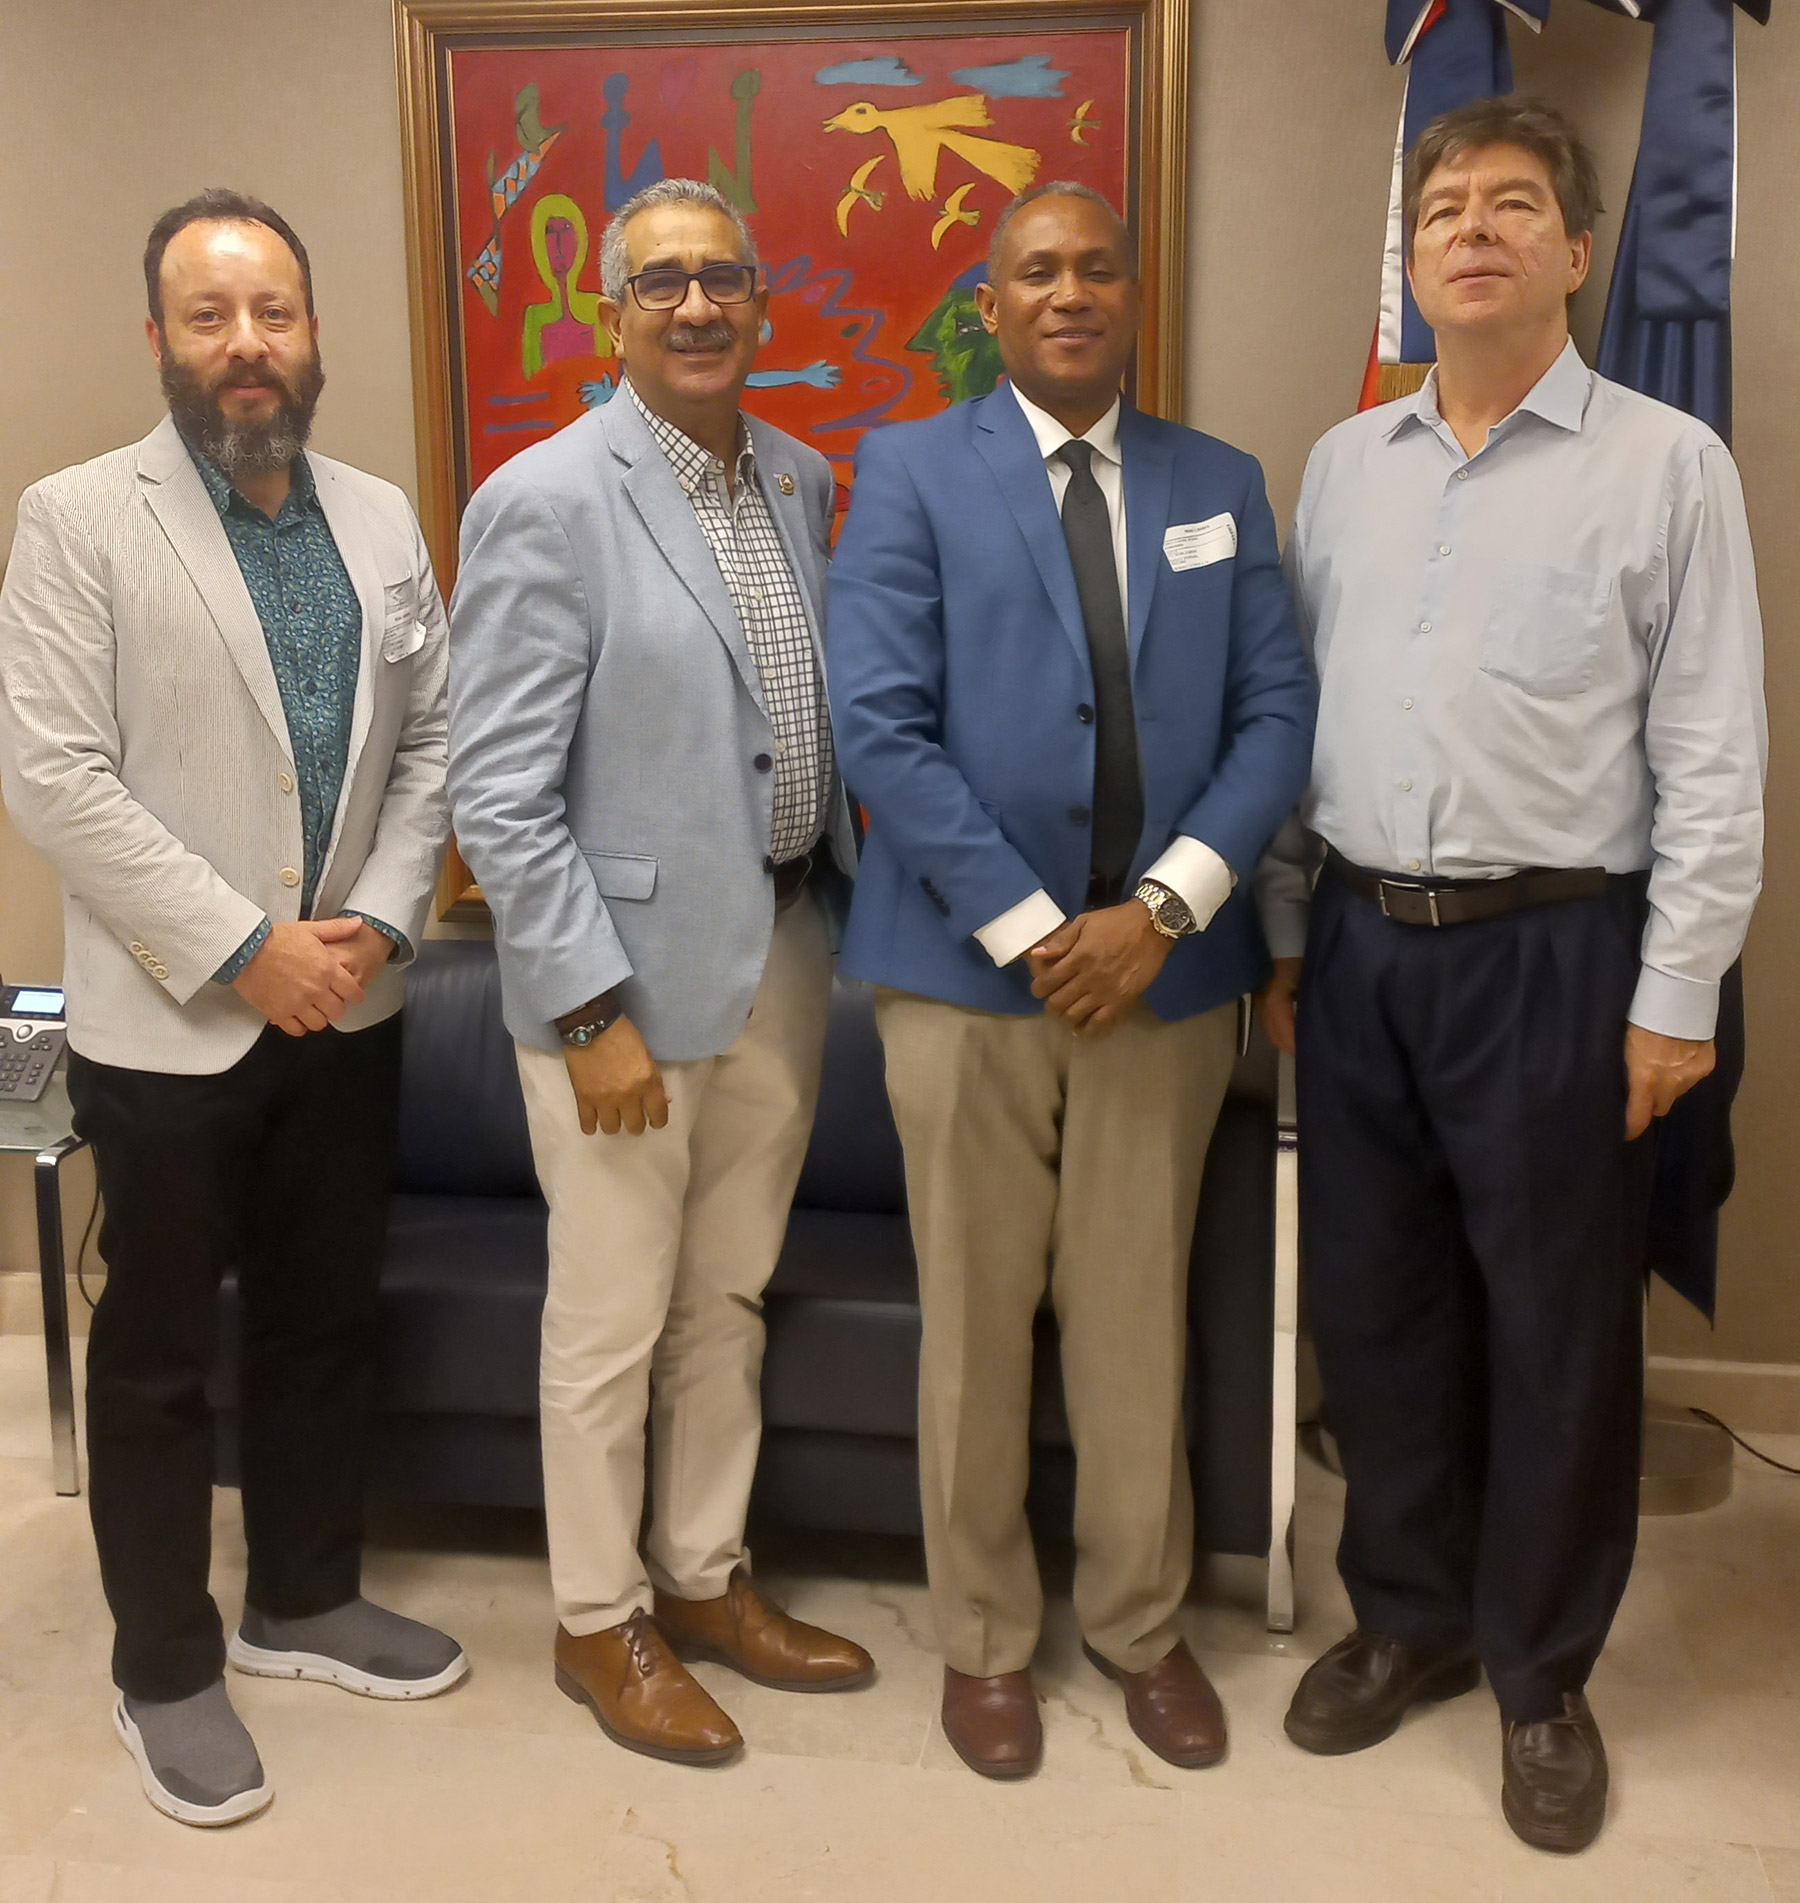 Max Lainfiesta (on the left), Euren Cuevas (third from the left), and coalition members after a meeting in October 2022 with World Bank representatives to discuss the solar power solution for the Dominican Republic.